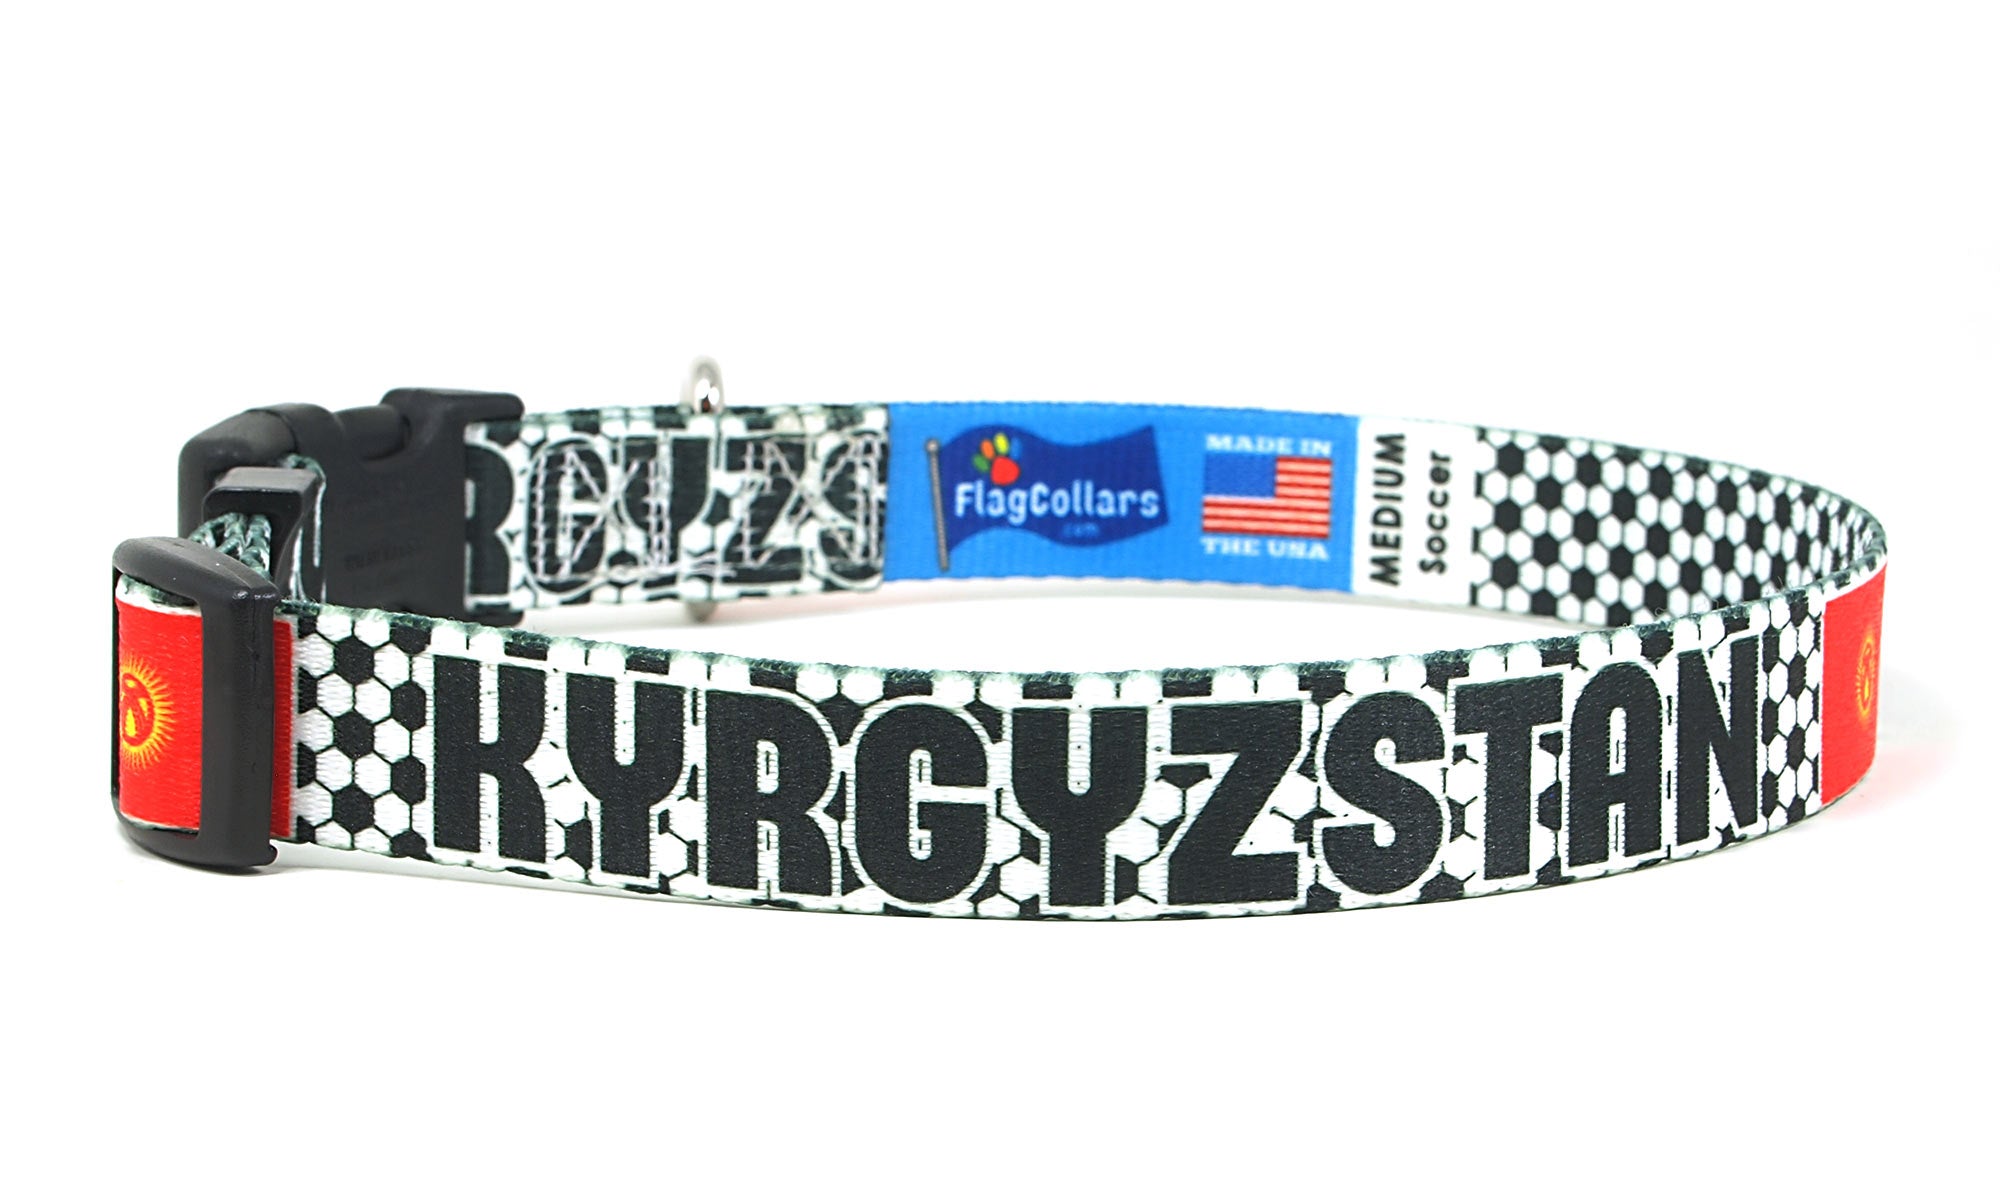 Kyrgyzstan Dog Collar for Soccer Fans | Black or Pink | Quick Release or Martingale Style | Made in NJ, USA